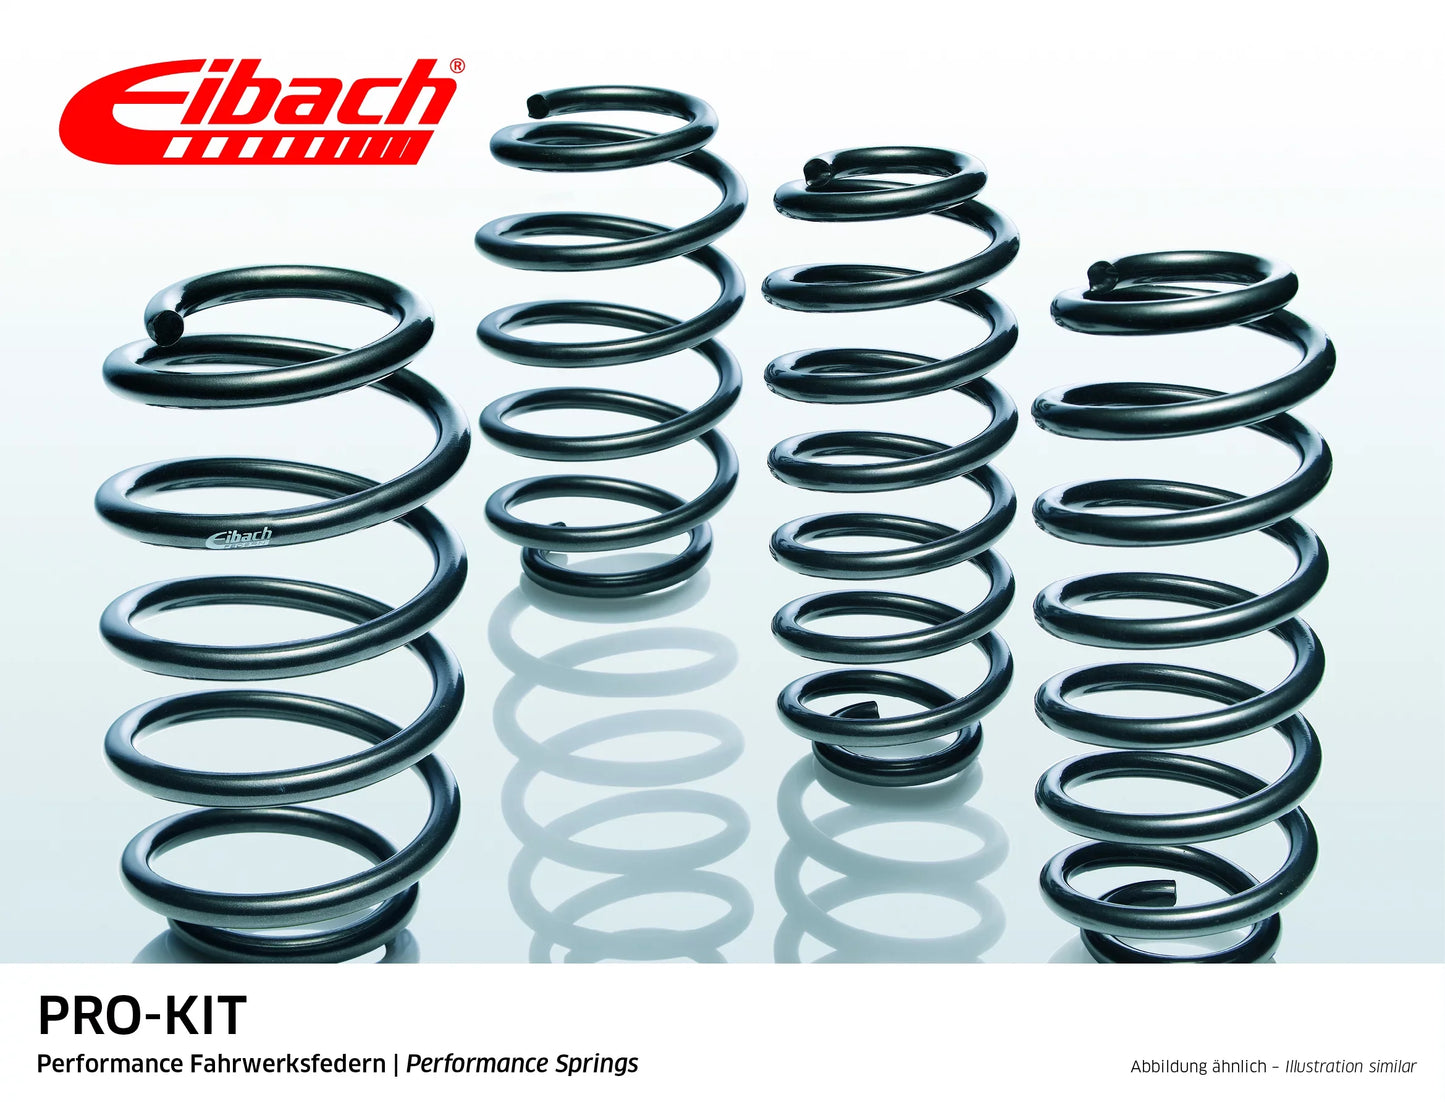 Eibach Pro-Kit Lowering Springs (E10-20-014-02-22) at £234.39